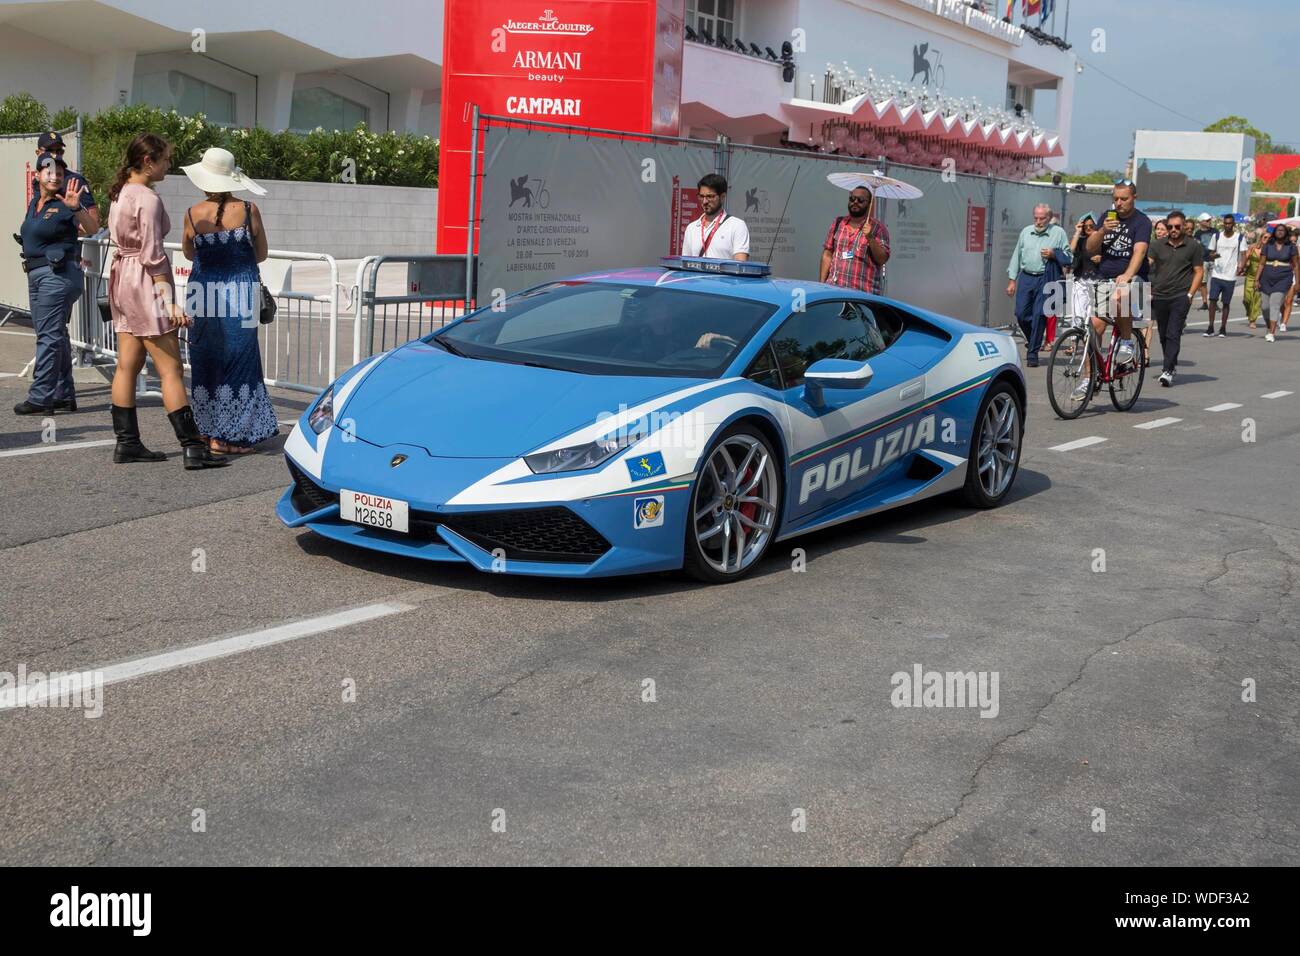 Venice, Italy. 29th Aug 2019. Italian police Lamborghini seen during the 76th Venice Film Festival at Palazzo del Cinema on the Lido in Venice, Italy, on 29 August 2019. | usage worldwide Credit: dpa picture alliance/Alamy Live News Stock Photo